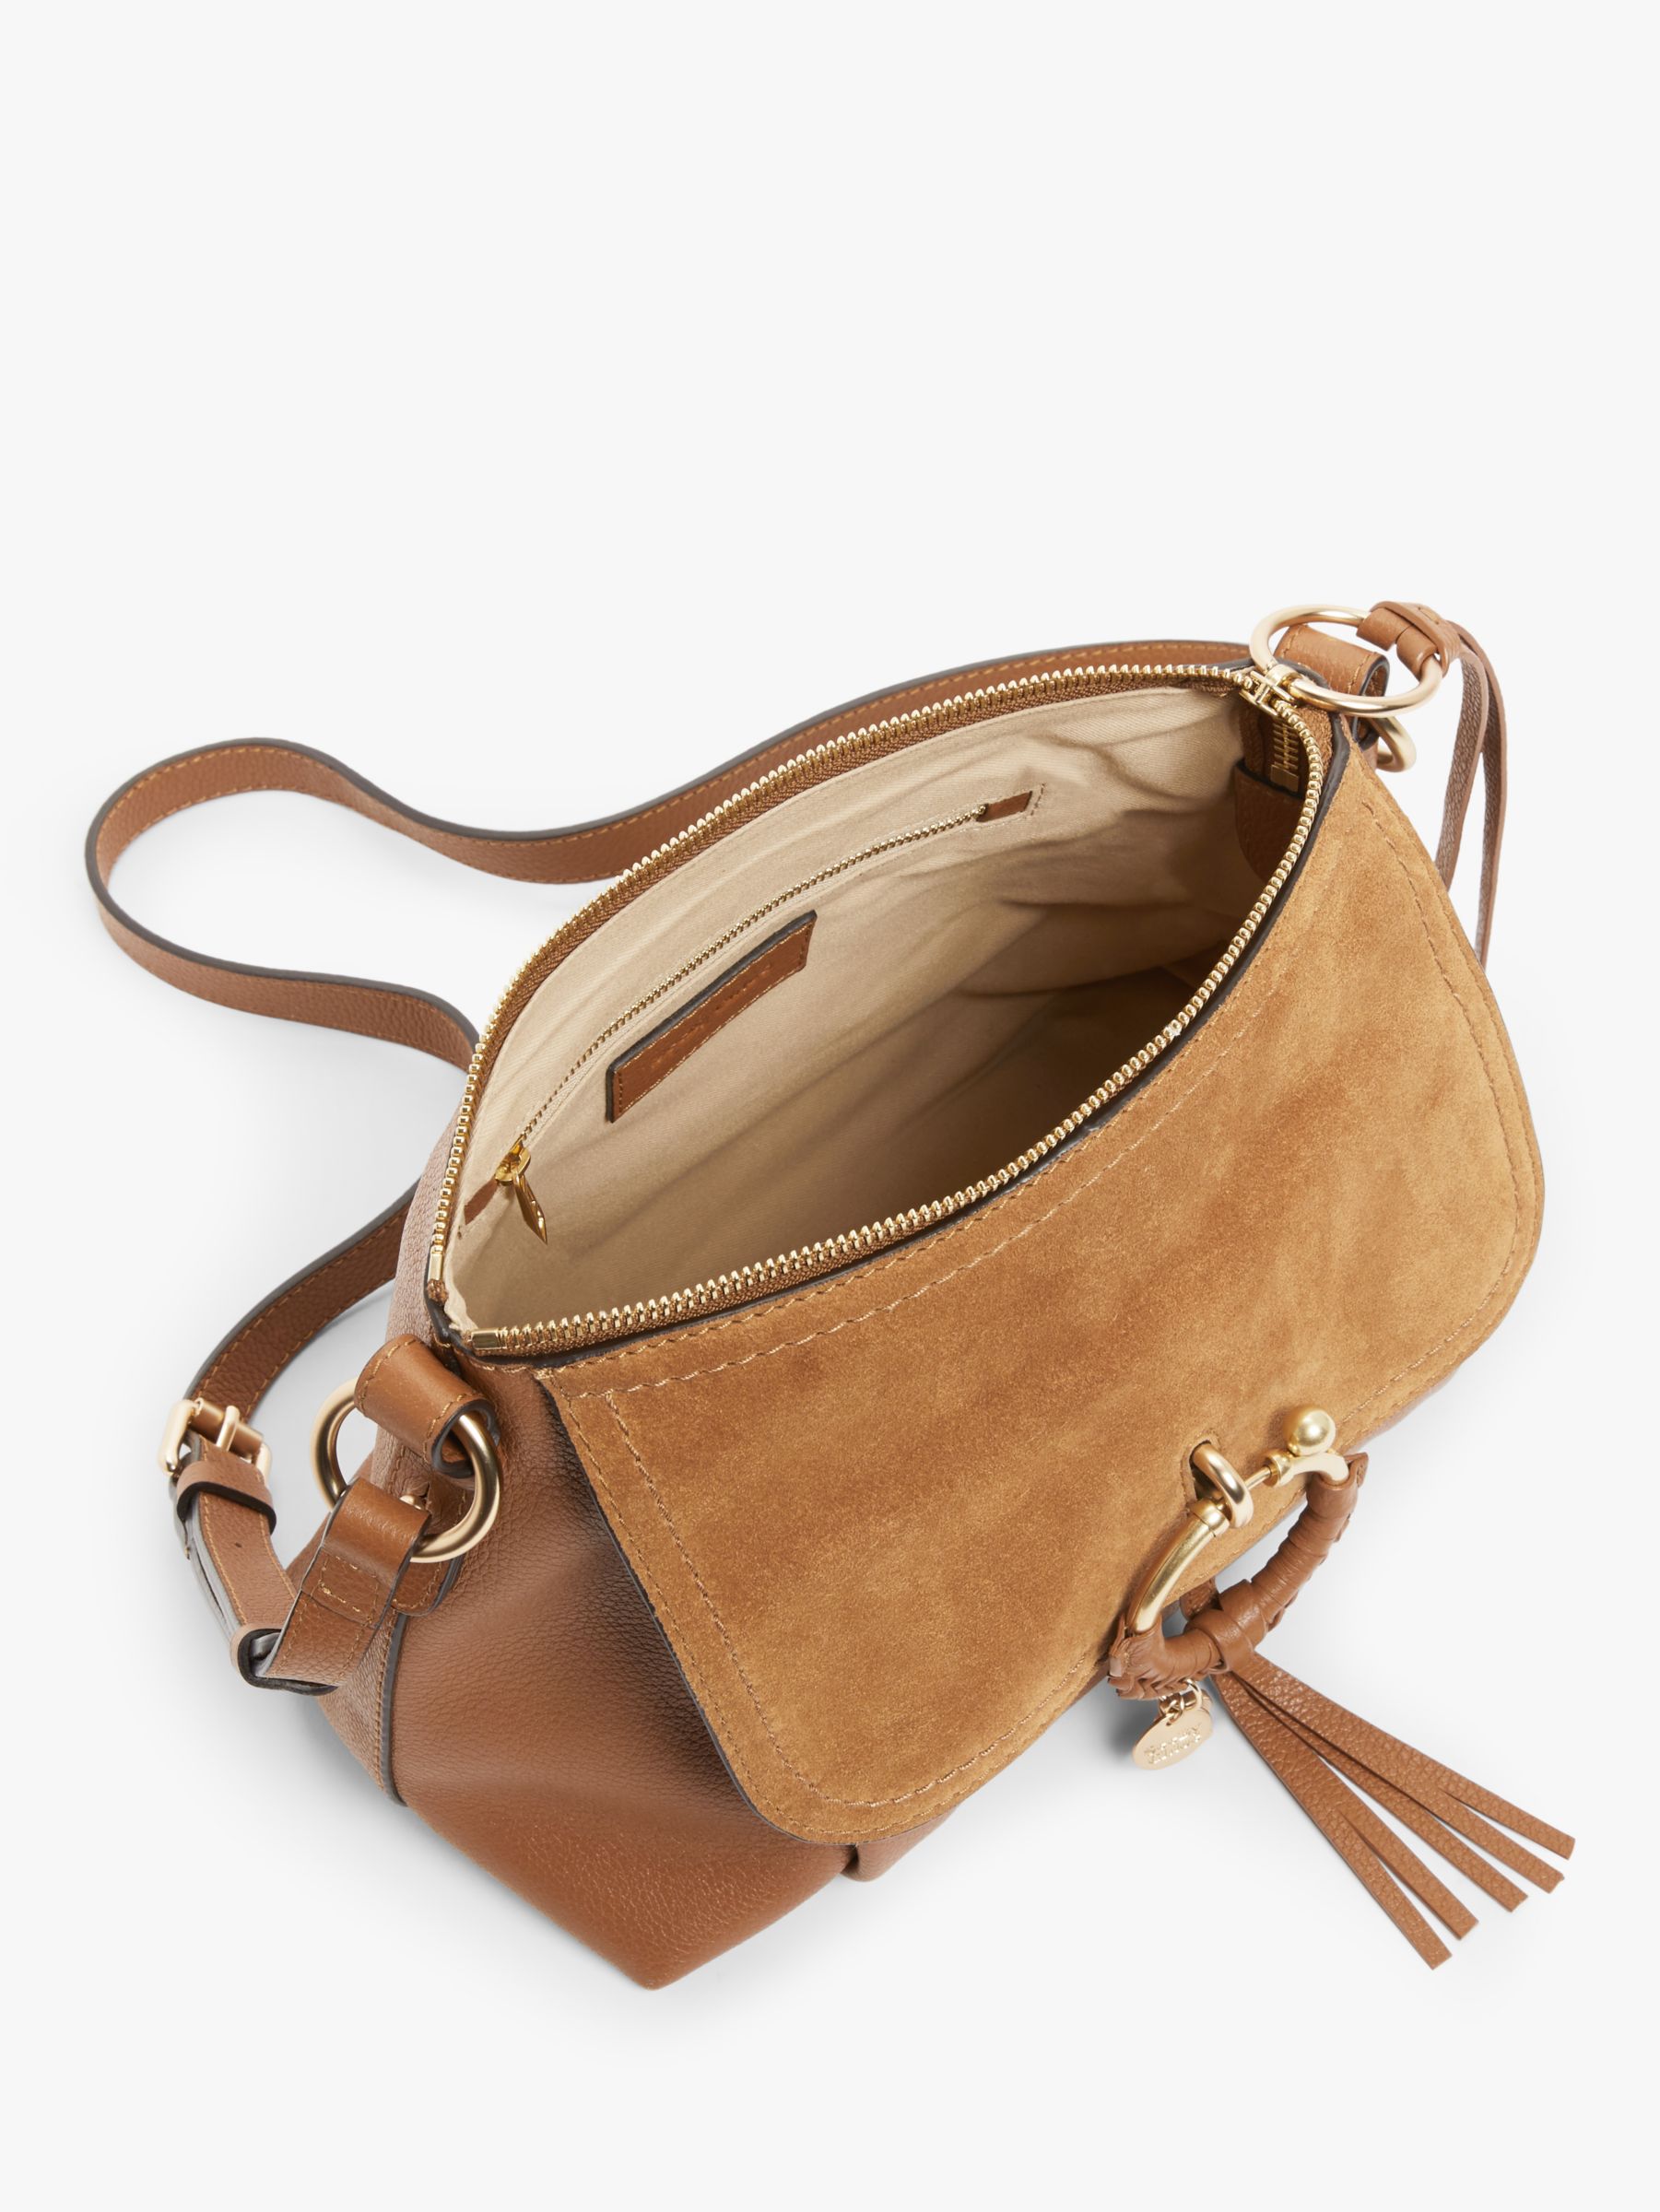 Buy See By Chloé Joan Suede Leather Small Satchel Bag, Caramello Online at johnlewis.com